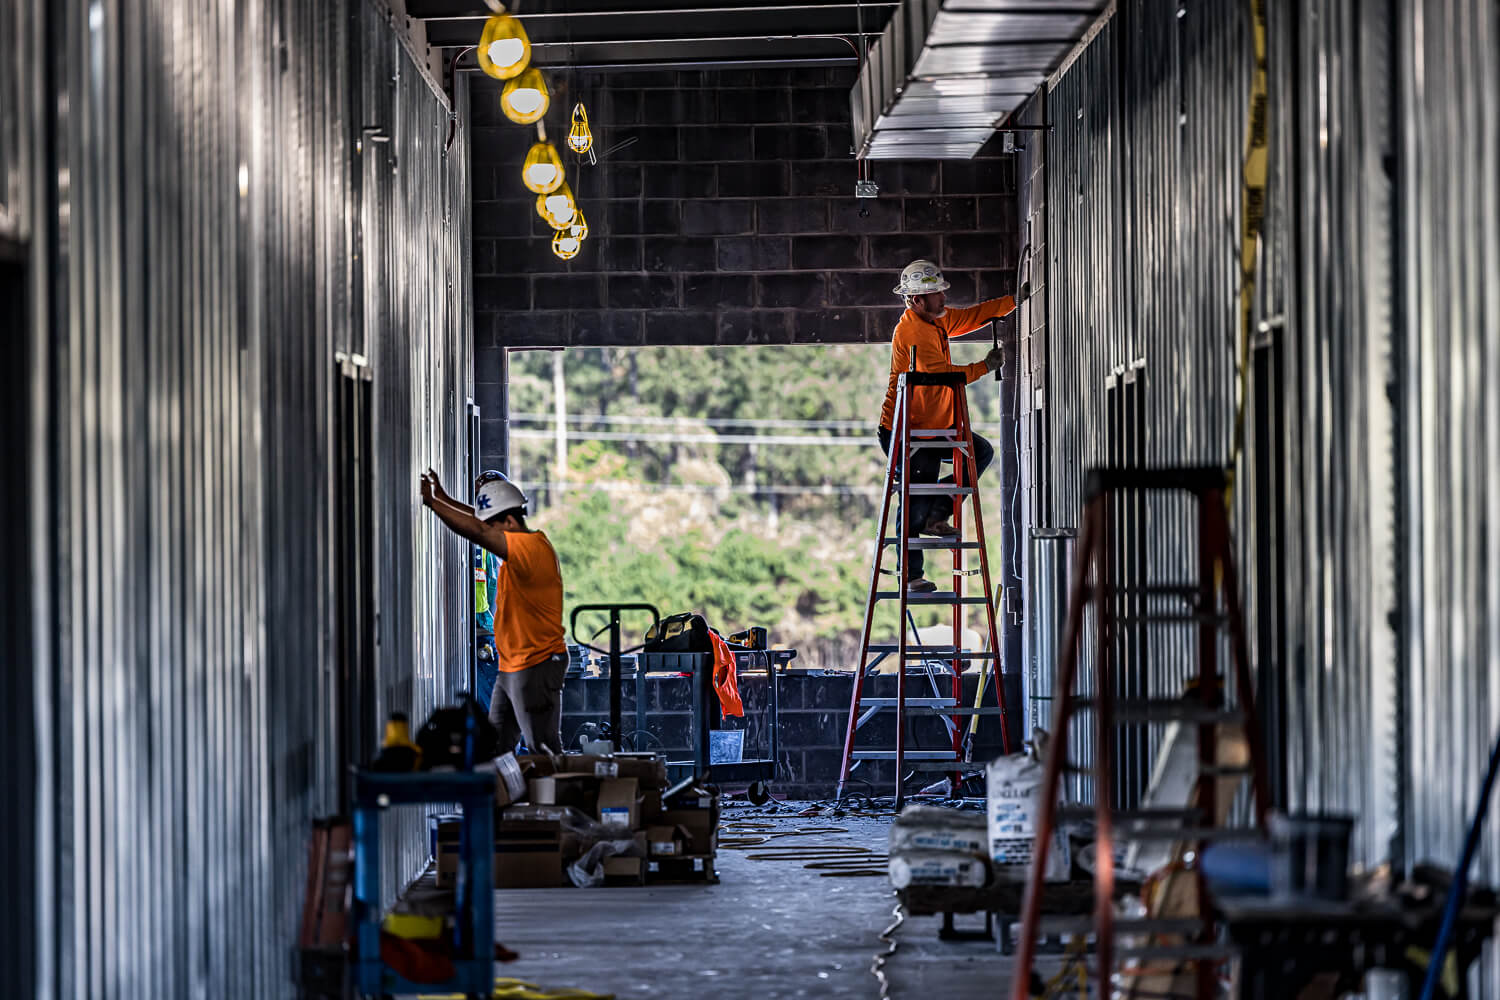 Two industrial workers at an unfinished industrial building in South Carolina.